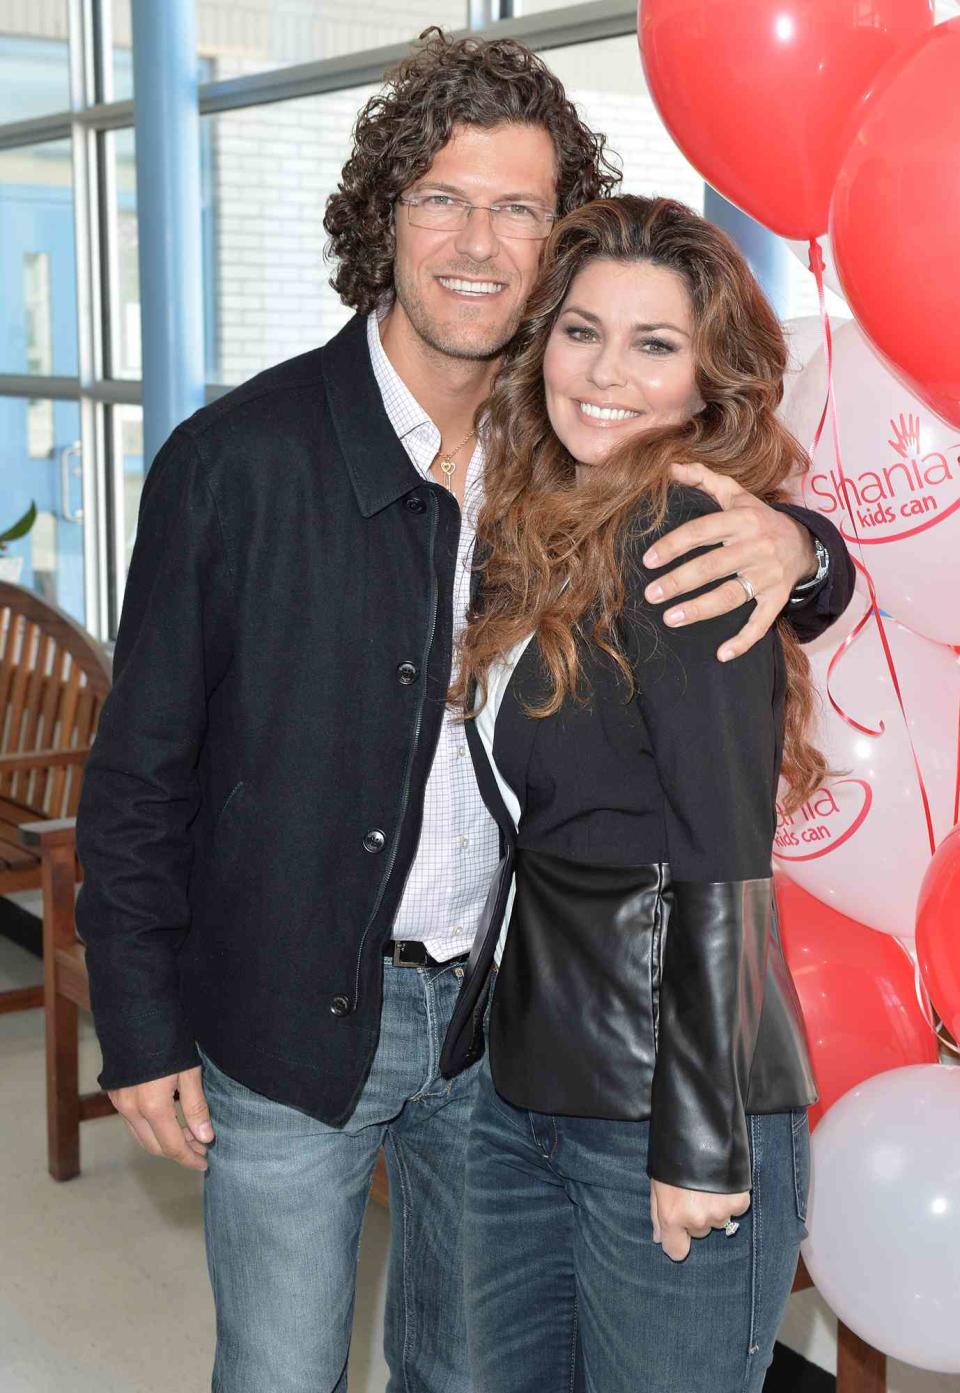 Frederic Thiebaud and Shania Twain attend The Dilawri Foundation and The Peel Board Launch for "Shania Kids Can" Clubhouse on September 19, 2014 in Brampton, Canada